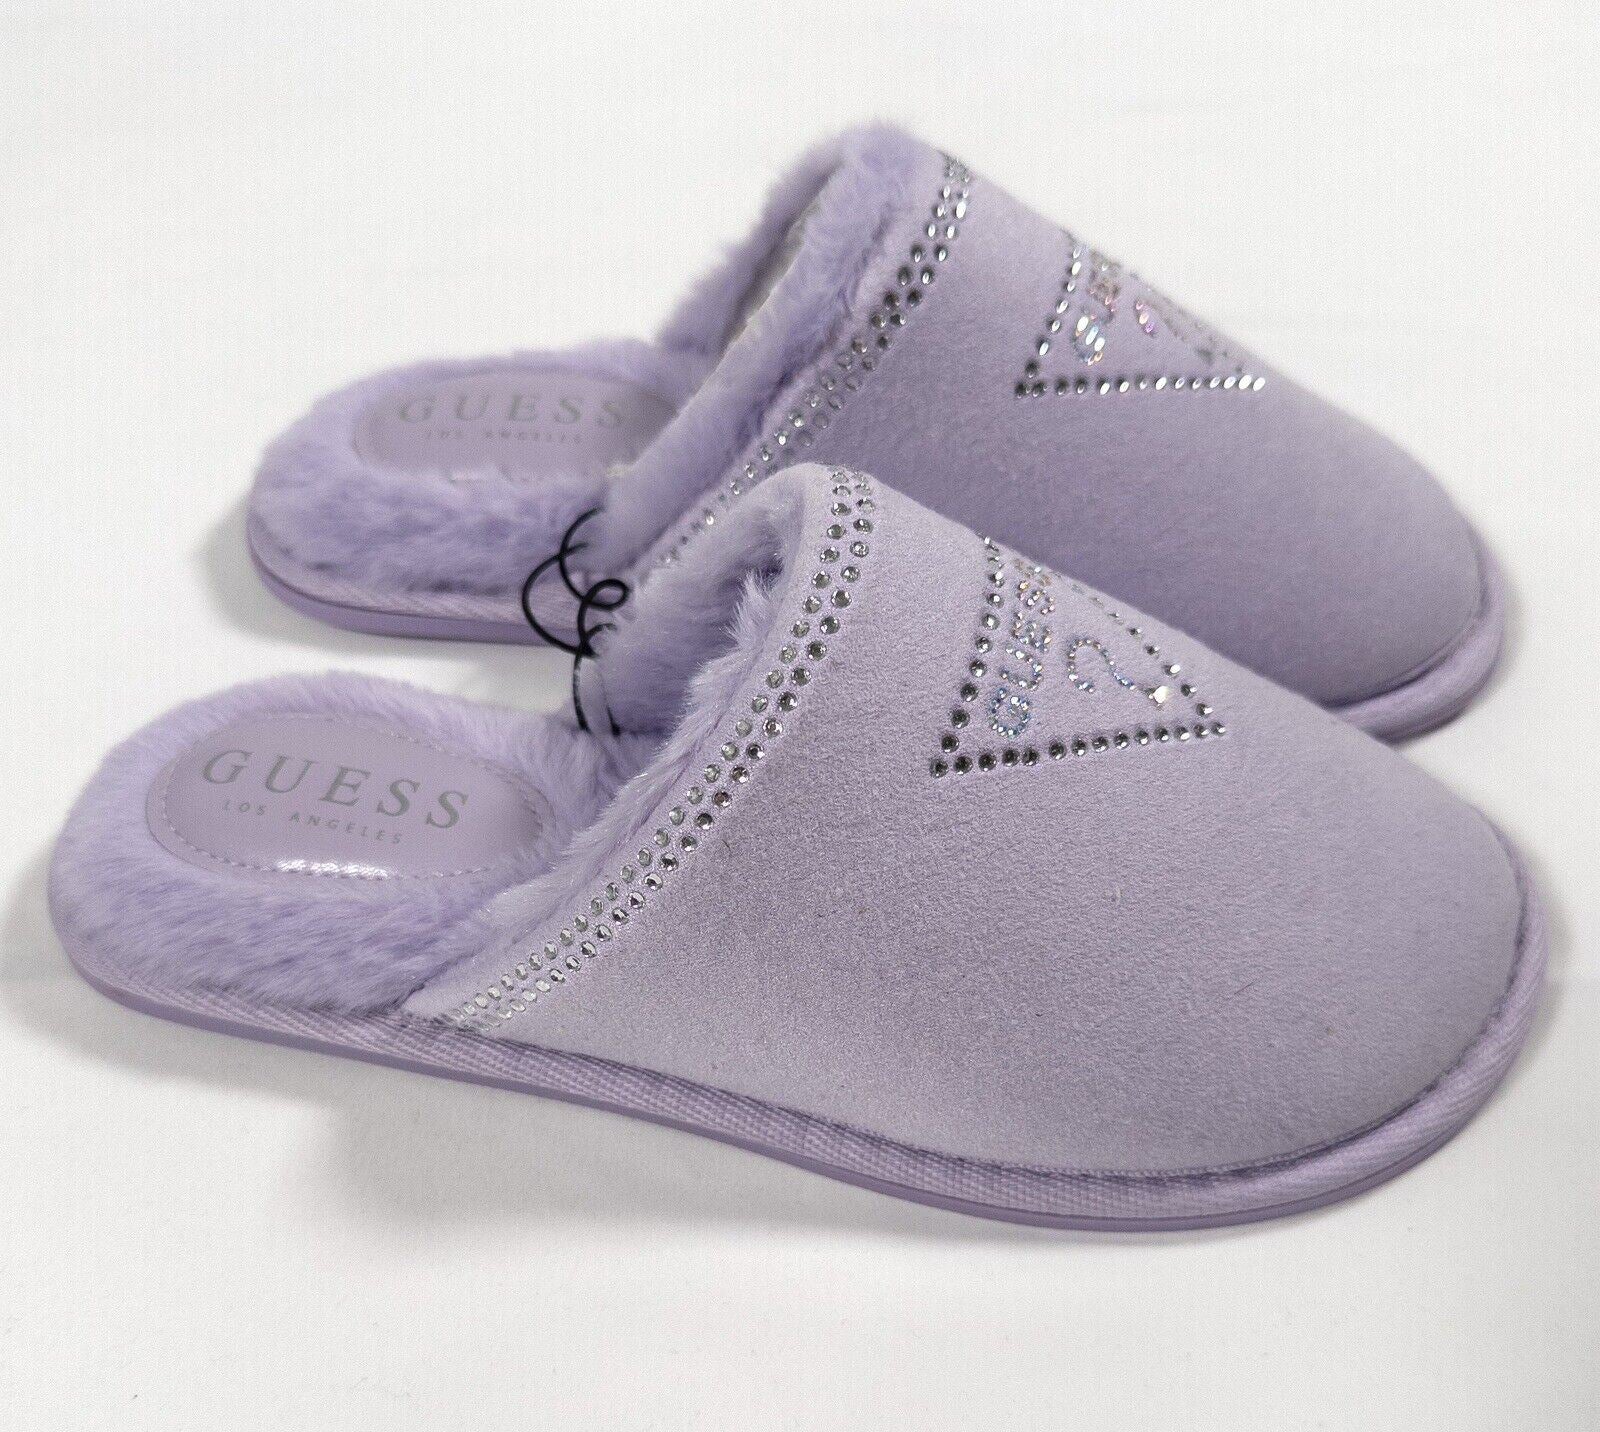 GUESS Women's Lilac Slip On Slippers Fluffy Size UK 6